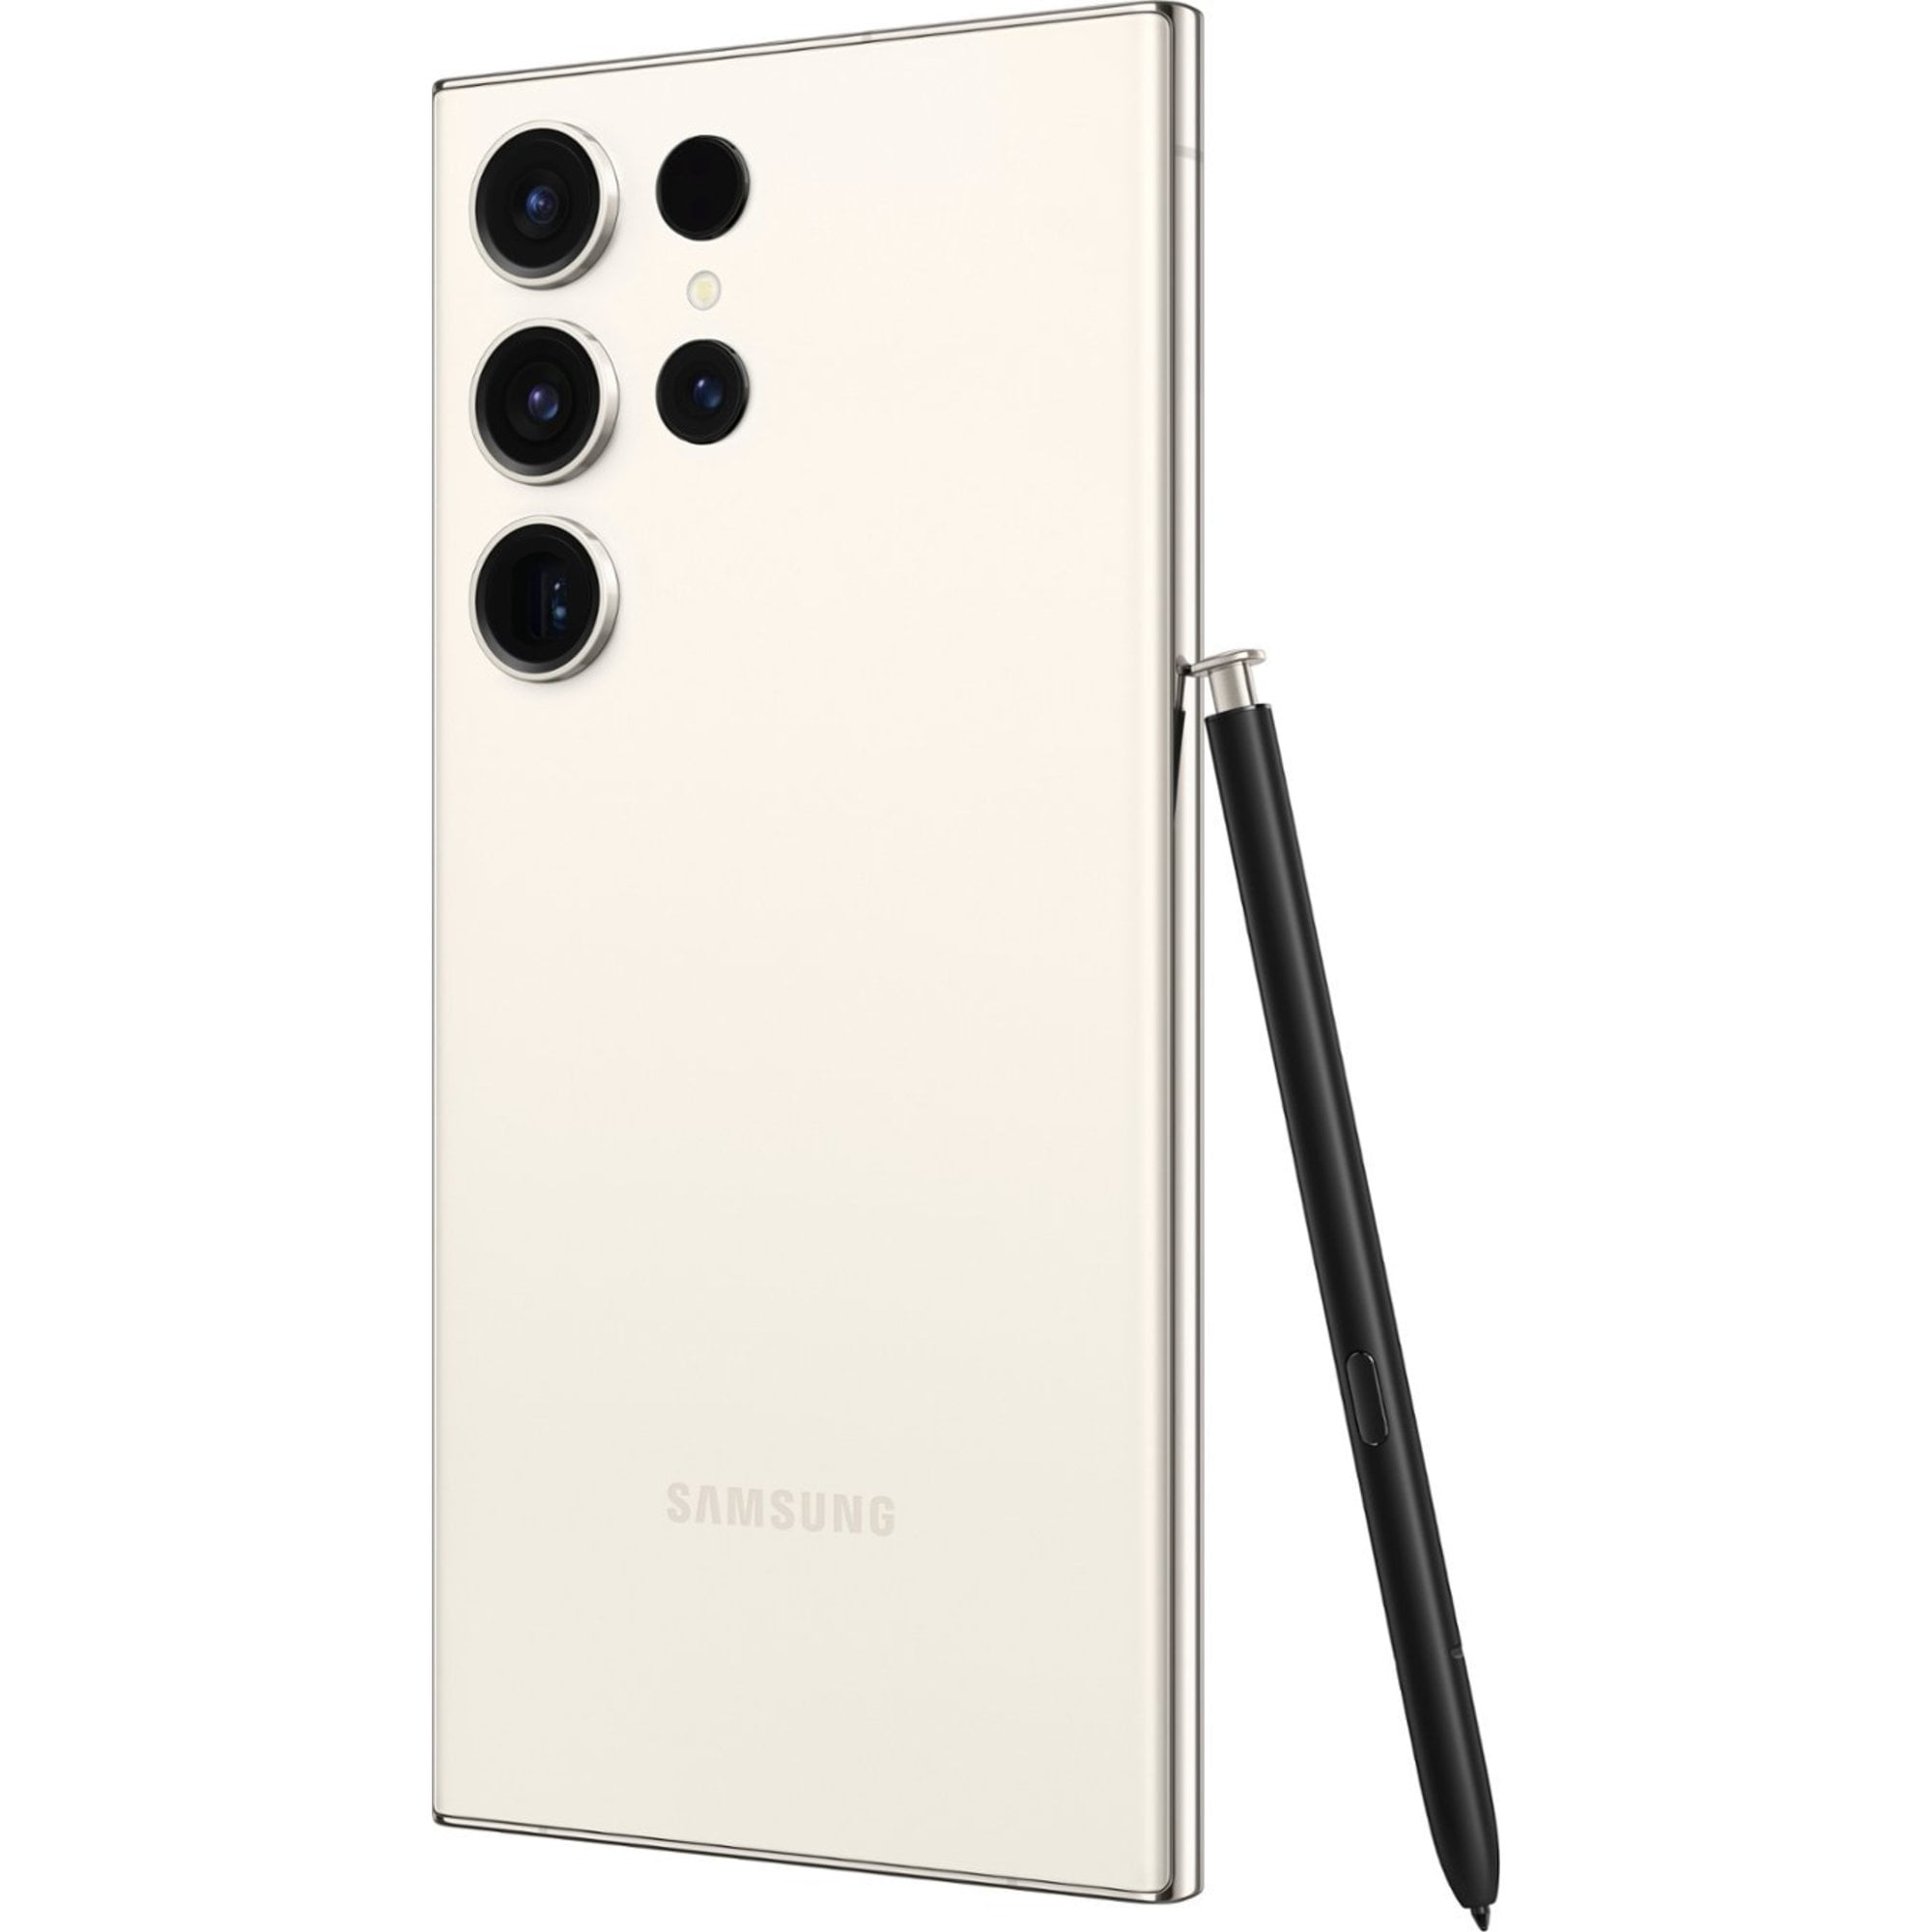 SAMSUNG Galaxy Pen, US 2023, S23 Storage, Long Ultra Factory Mode, SIM ESIM Battery Android Version, Life, Night 1 Phone, SINGLE S Unlocked Cell Smartphone, LAVENDER AND 200MP 512GB Camera